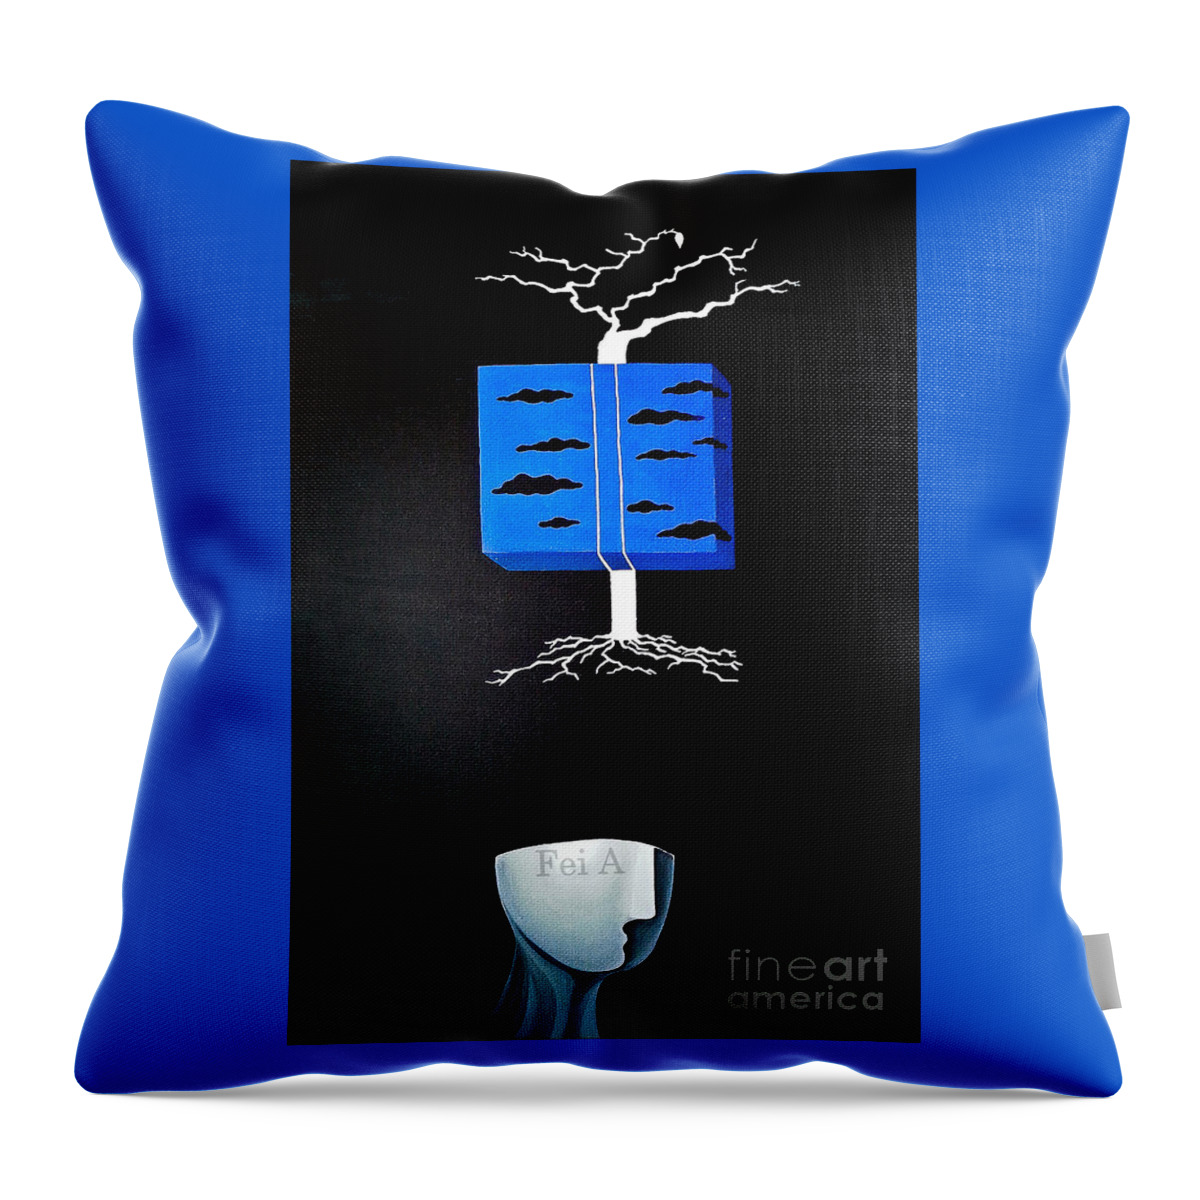 Google Images Throw Pillow featuring the painting Thought Block by Fei A